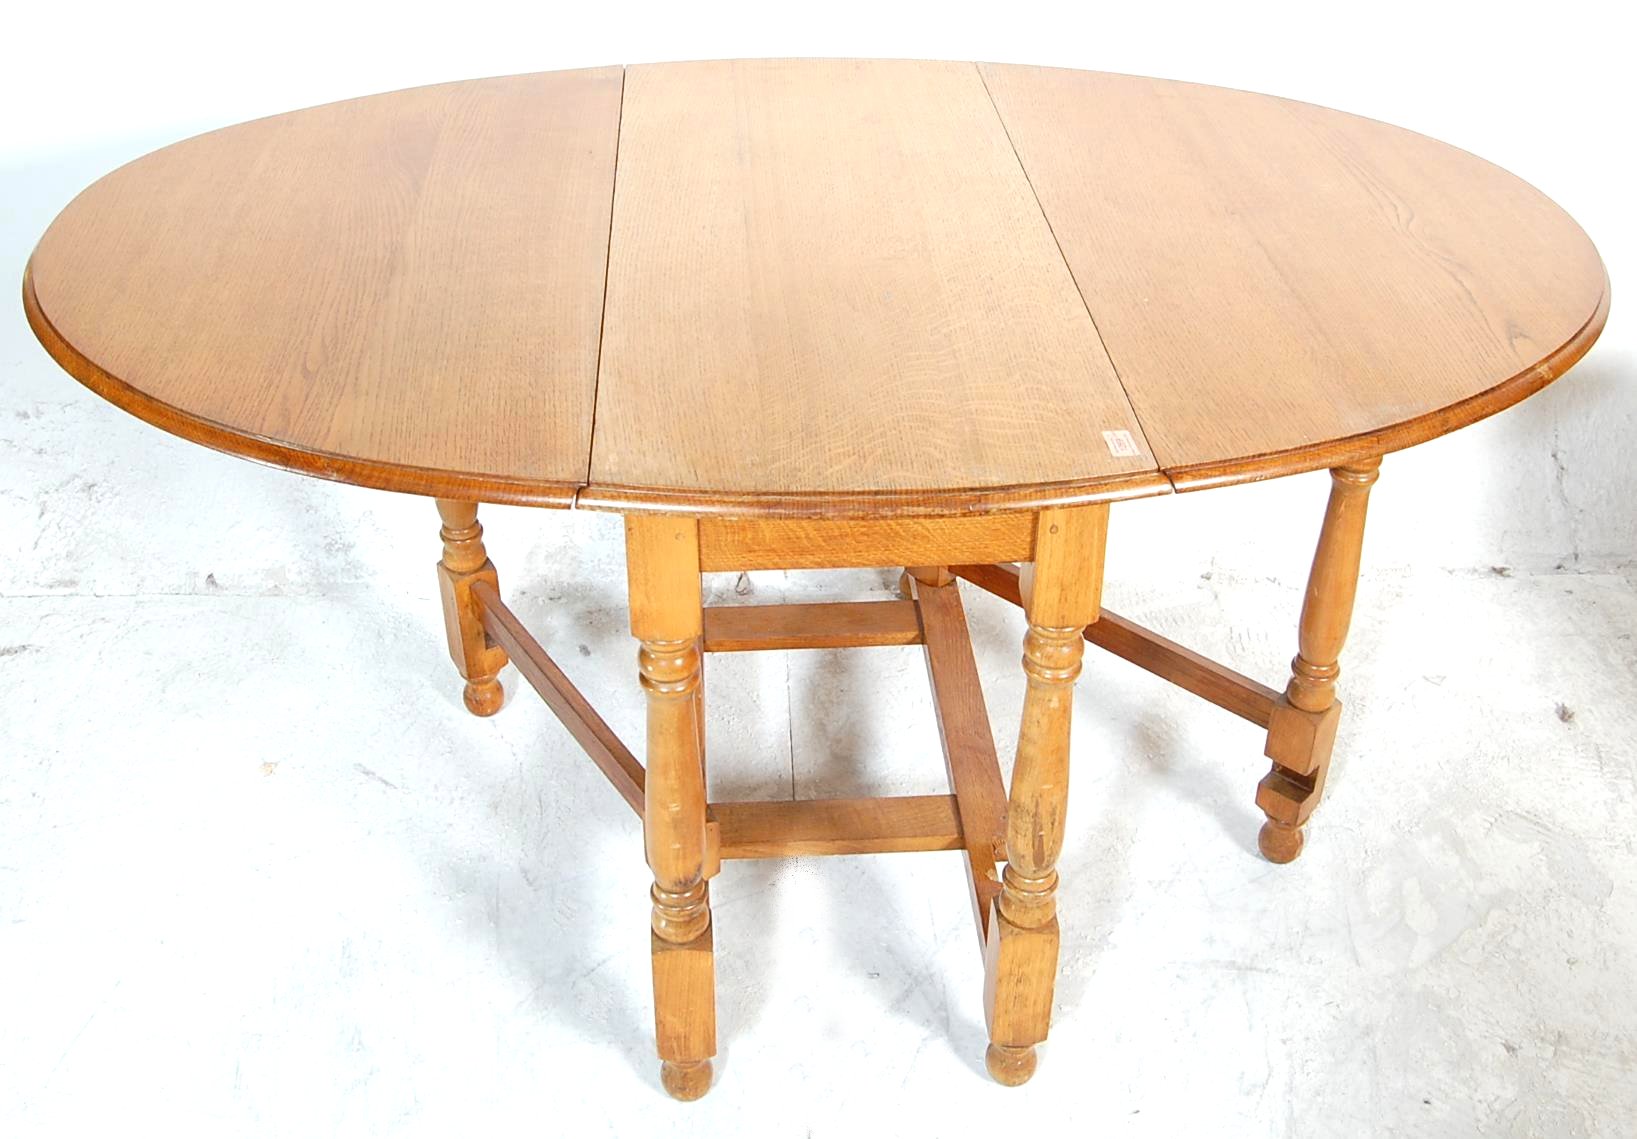 ANTIQUE STYLE OAK DINING TABLE AND CHAIRS - Image 3 of 5